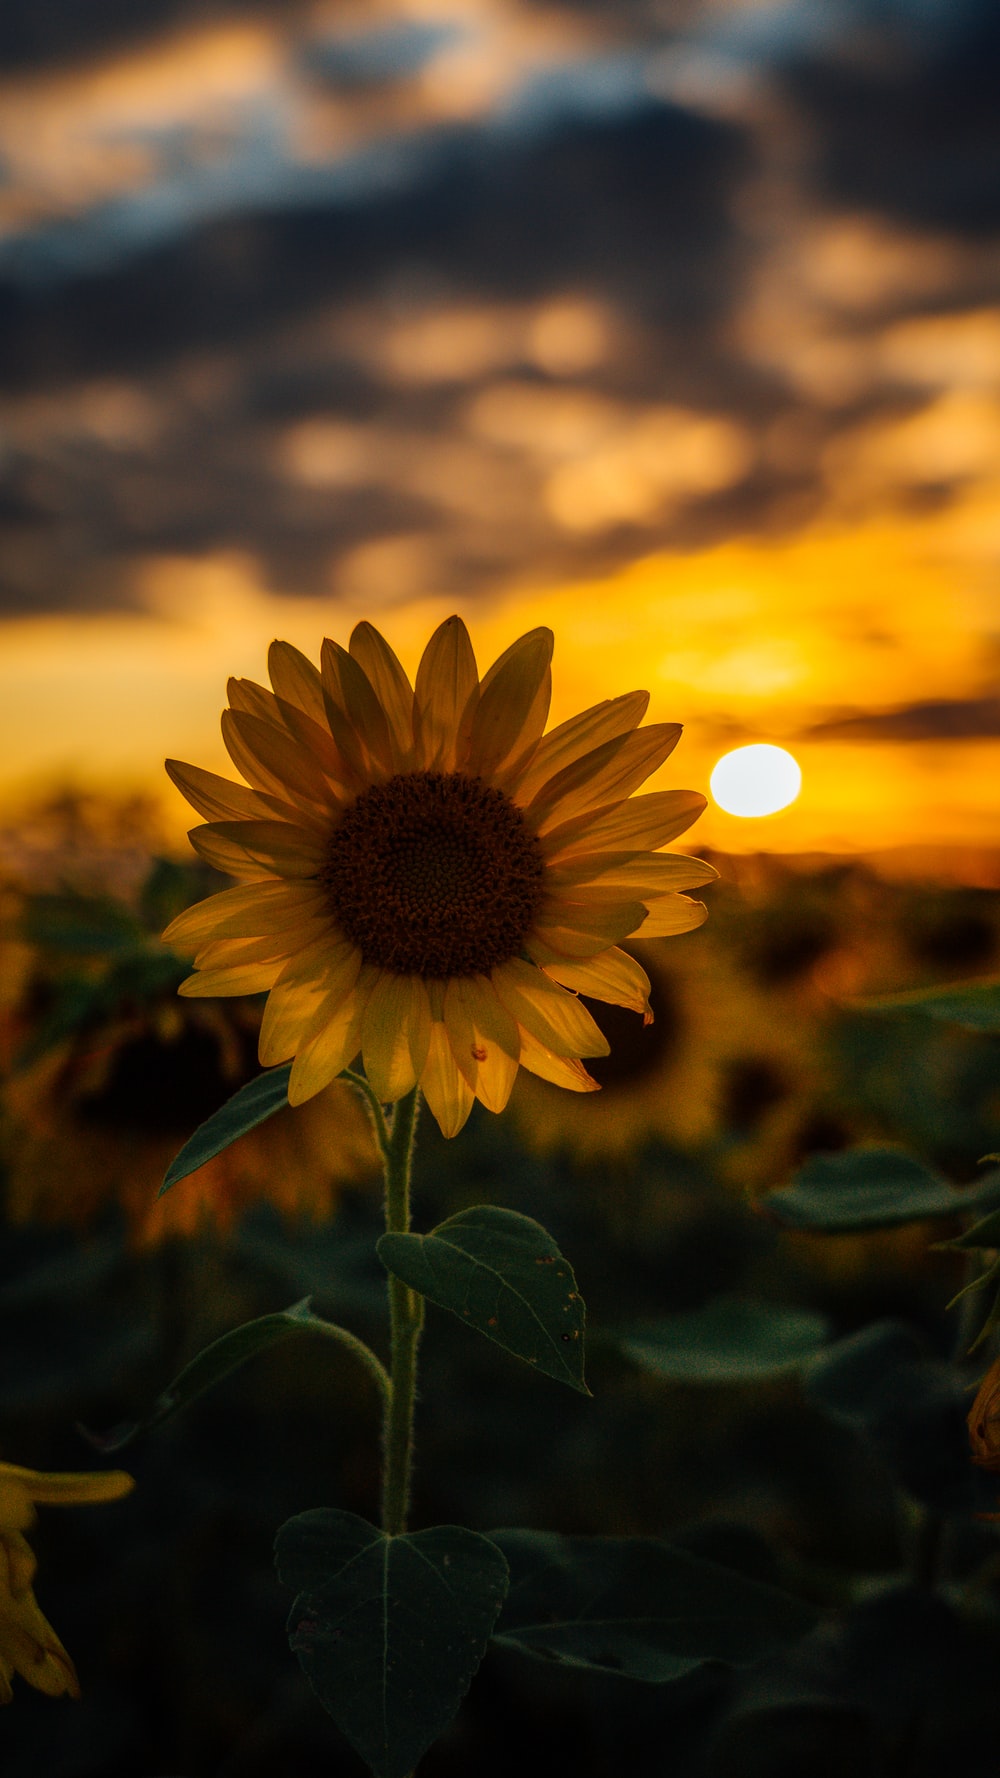 Selective Focus Photography Of Sunflower During Golden Hour Photo